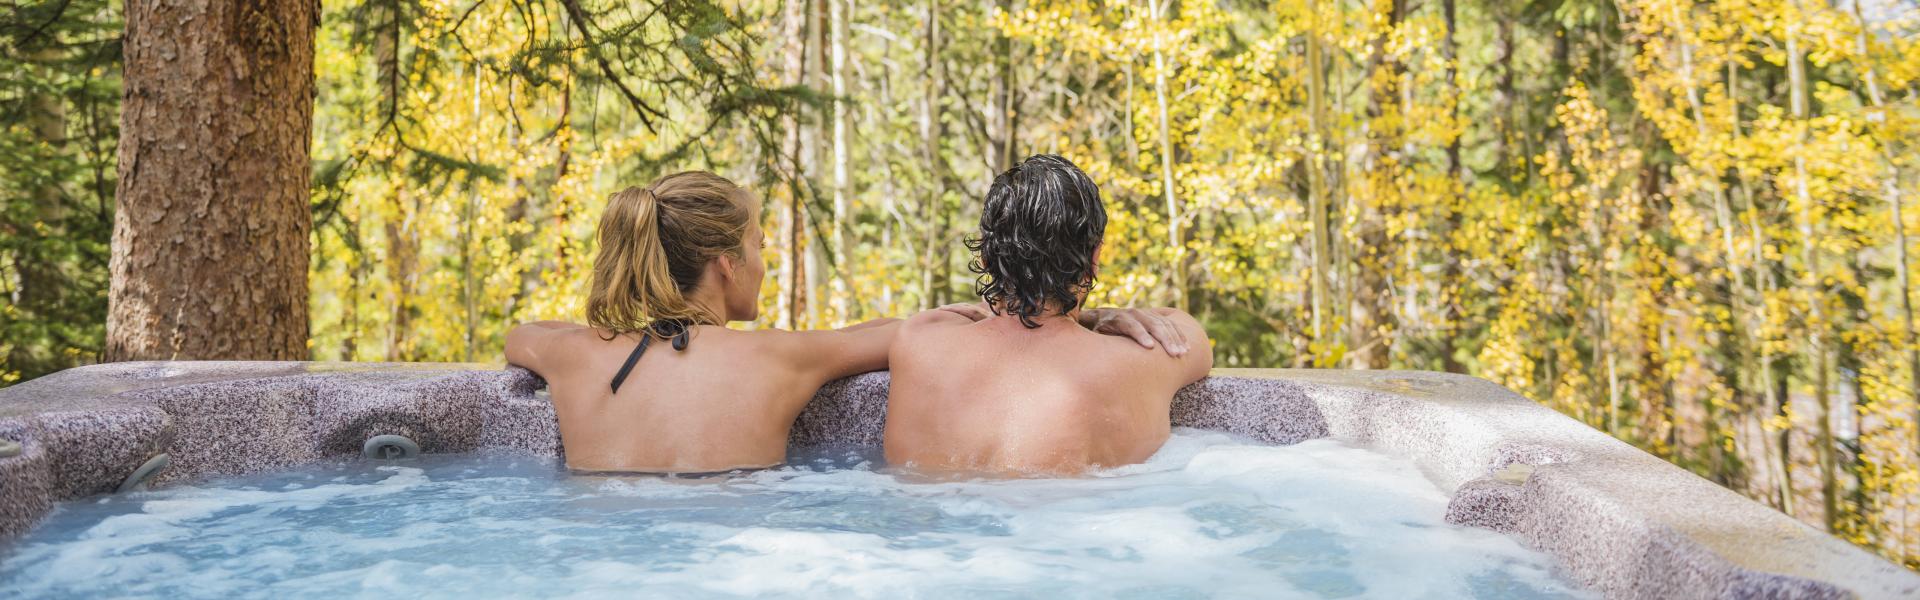 People in a hot tub in a holiday cottage